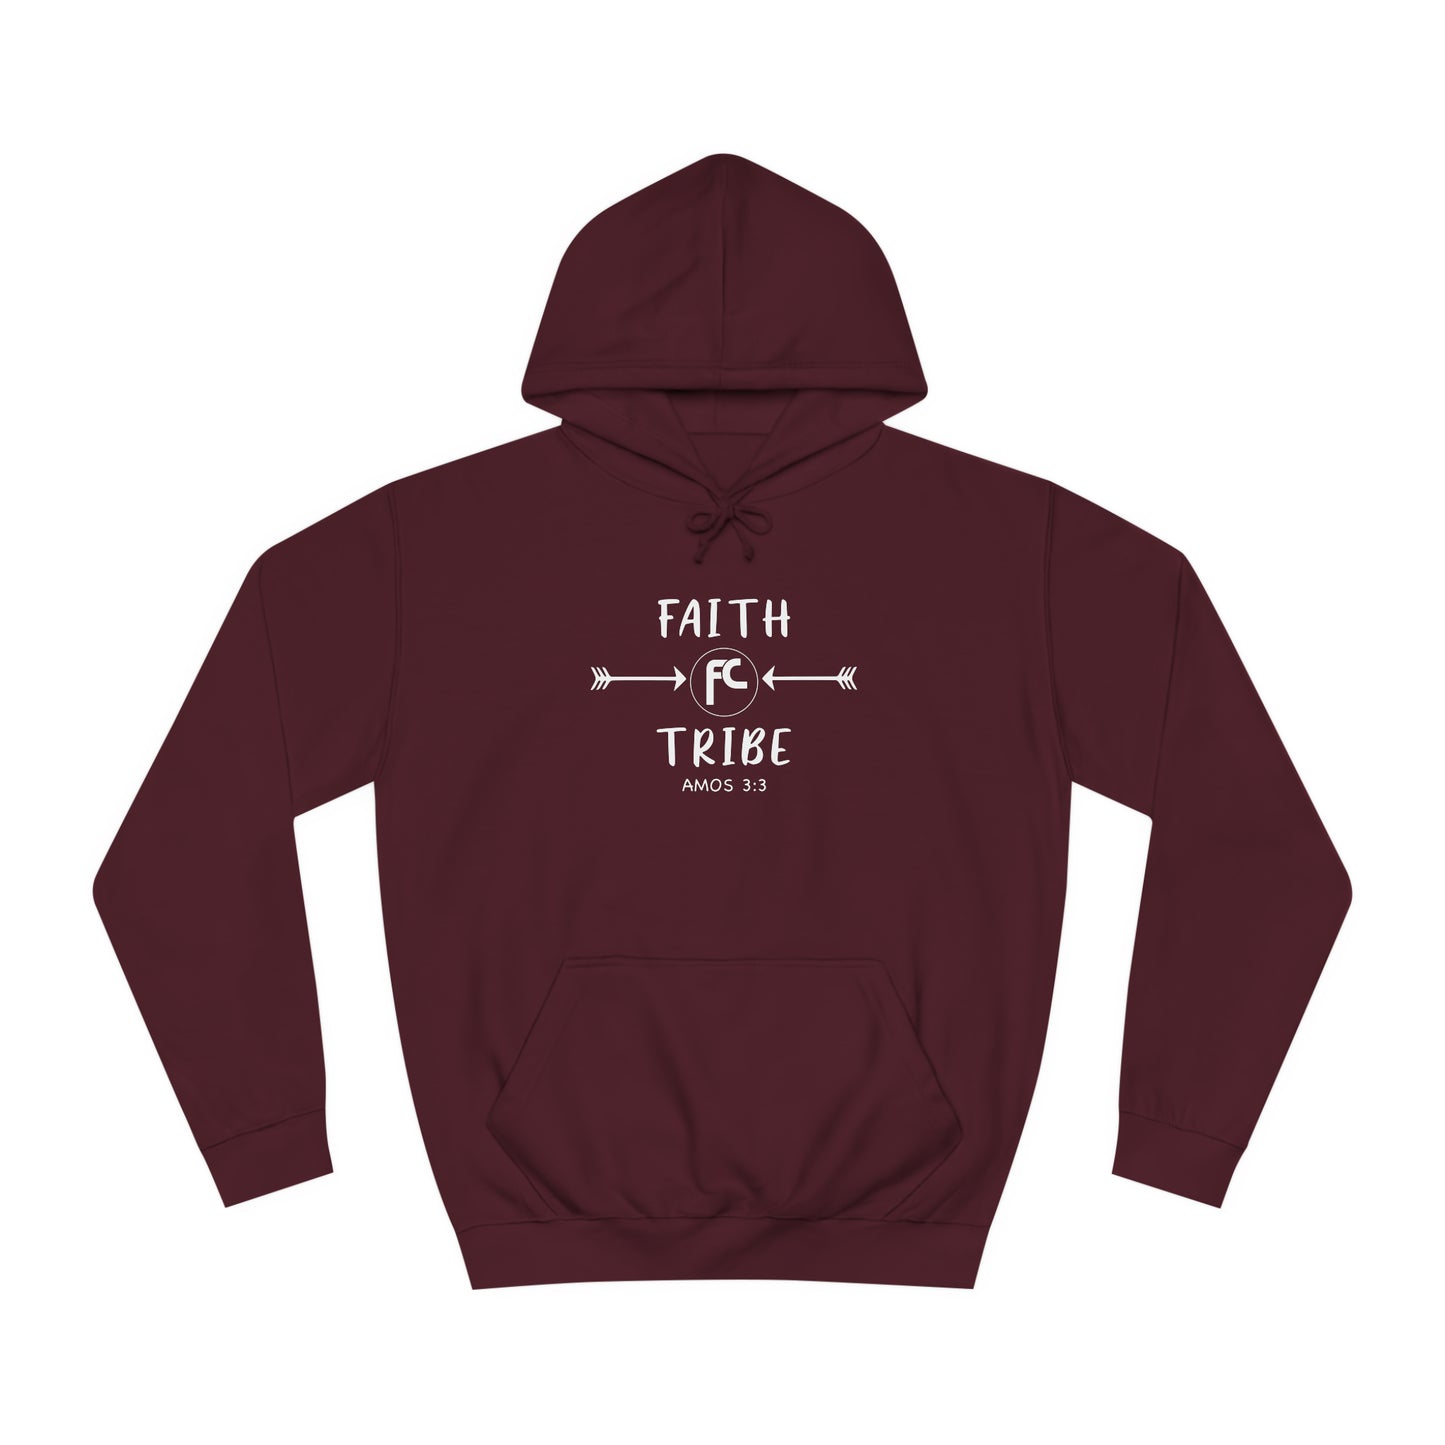 FAITH TRIBE in WHT Hoodie.